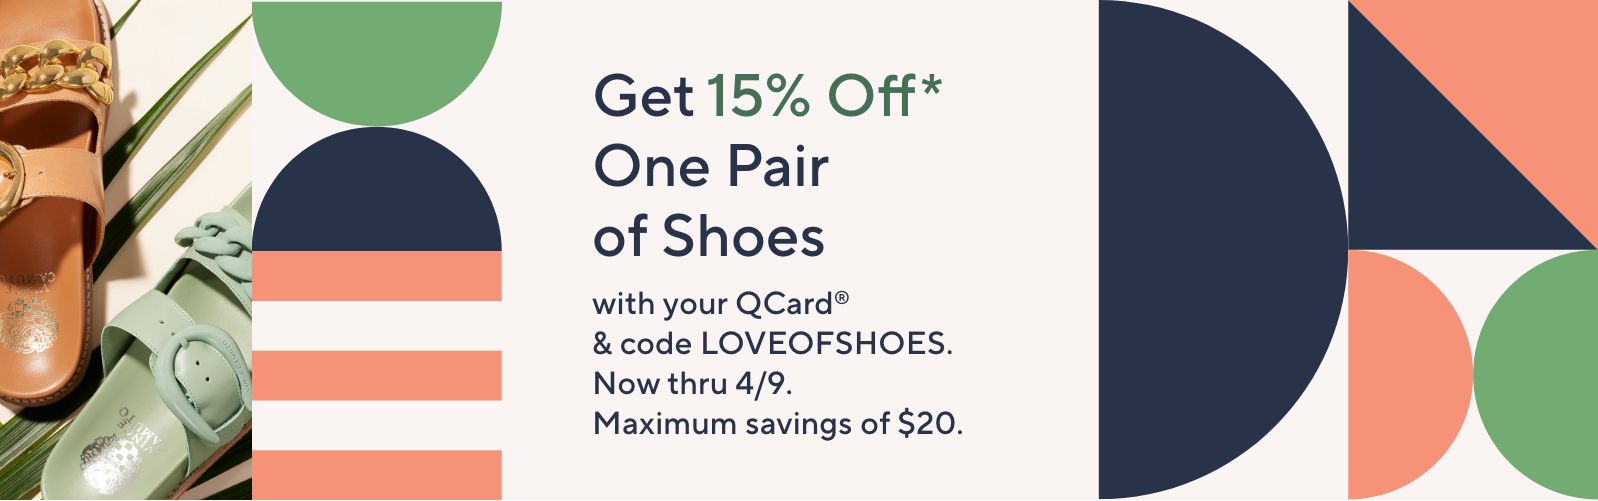 Get 15% Off* One Pair of Shoes with your QCard® & code LOVEOFSHOES. Now thru 4/9. Maximum savings of $20.